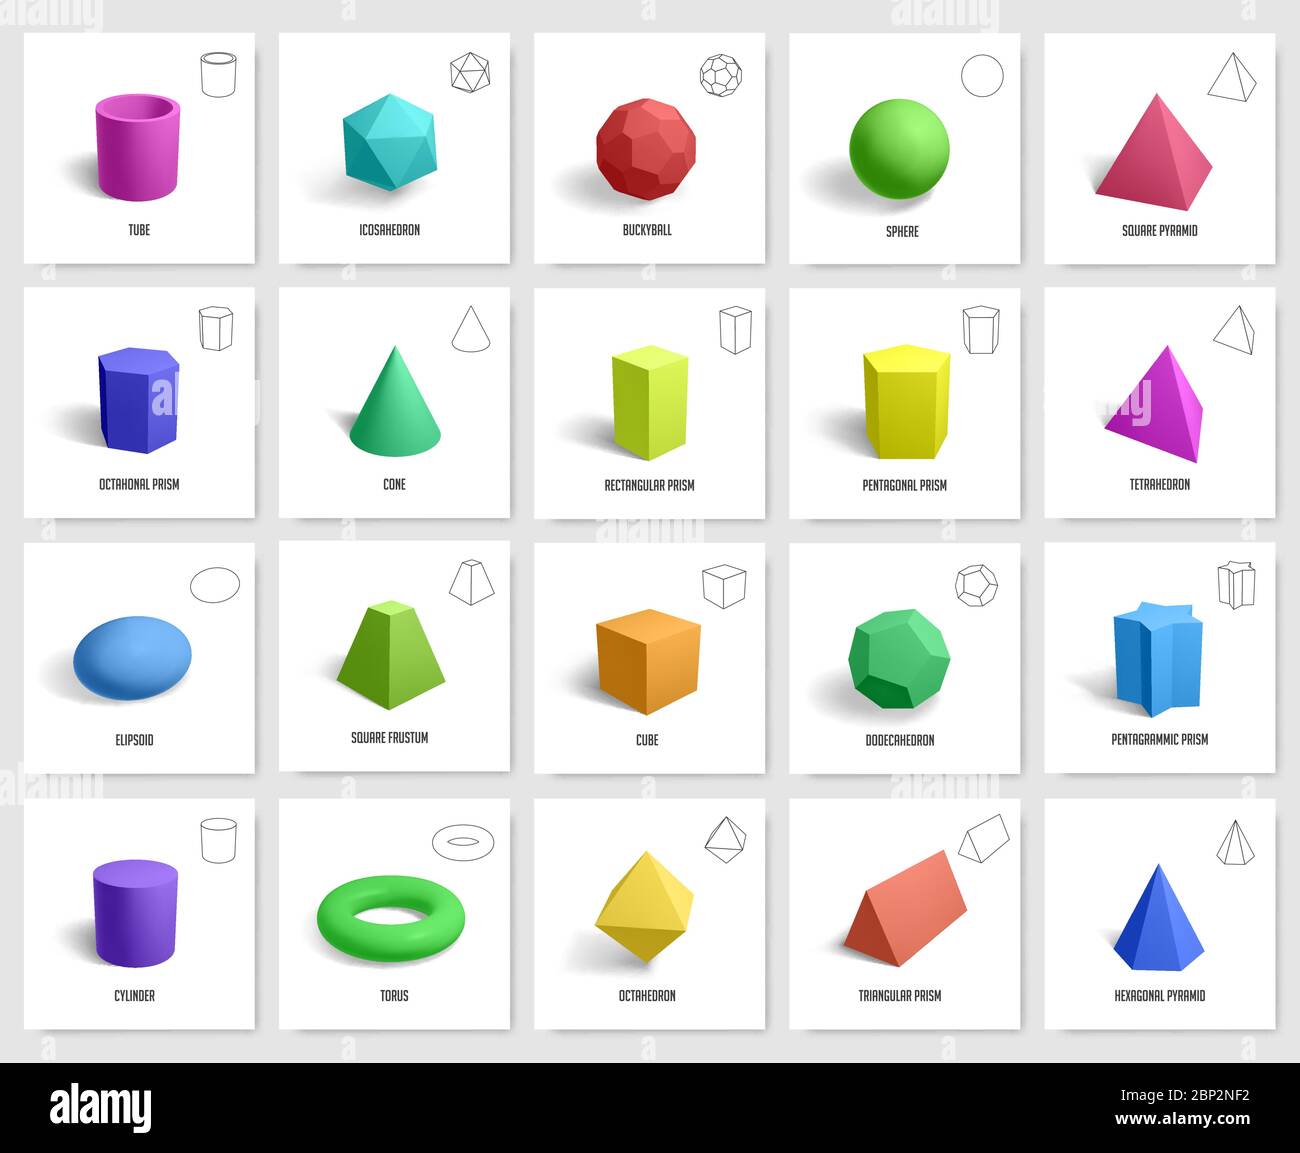 Realistic 3d shapes. geometry prism, cube, figures, geometric polygon and hexagon shapes vector illustration icons set Stock Vector & Art - Alamy